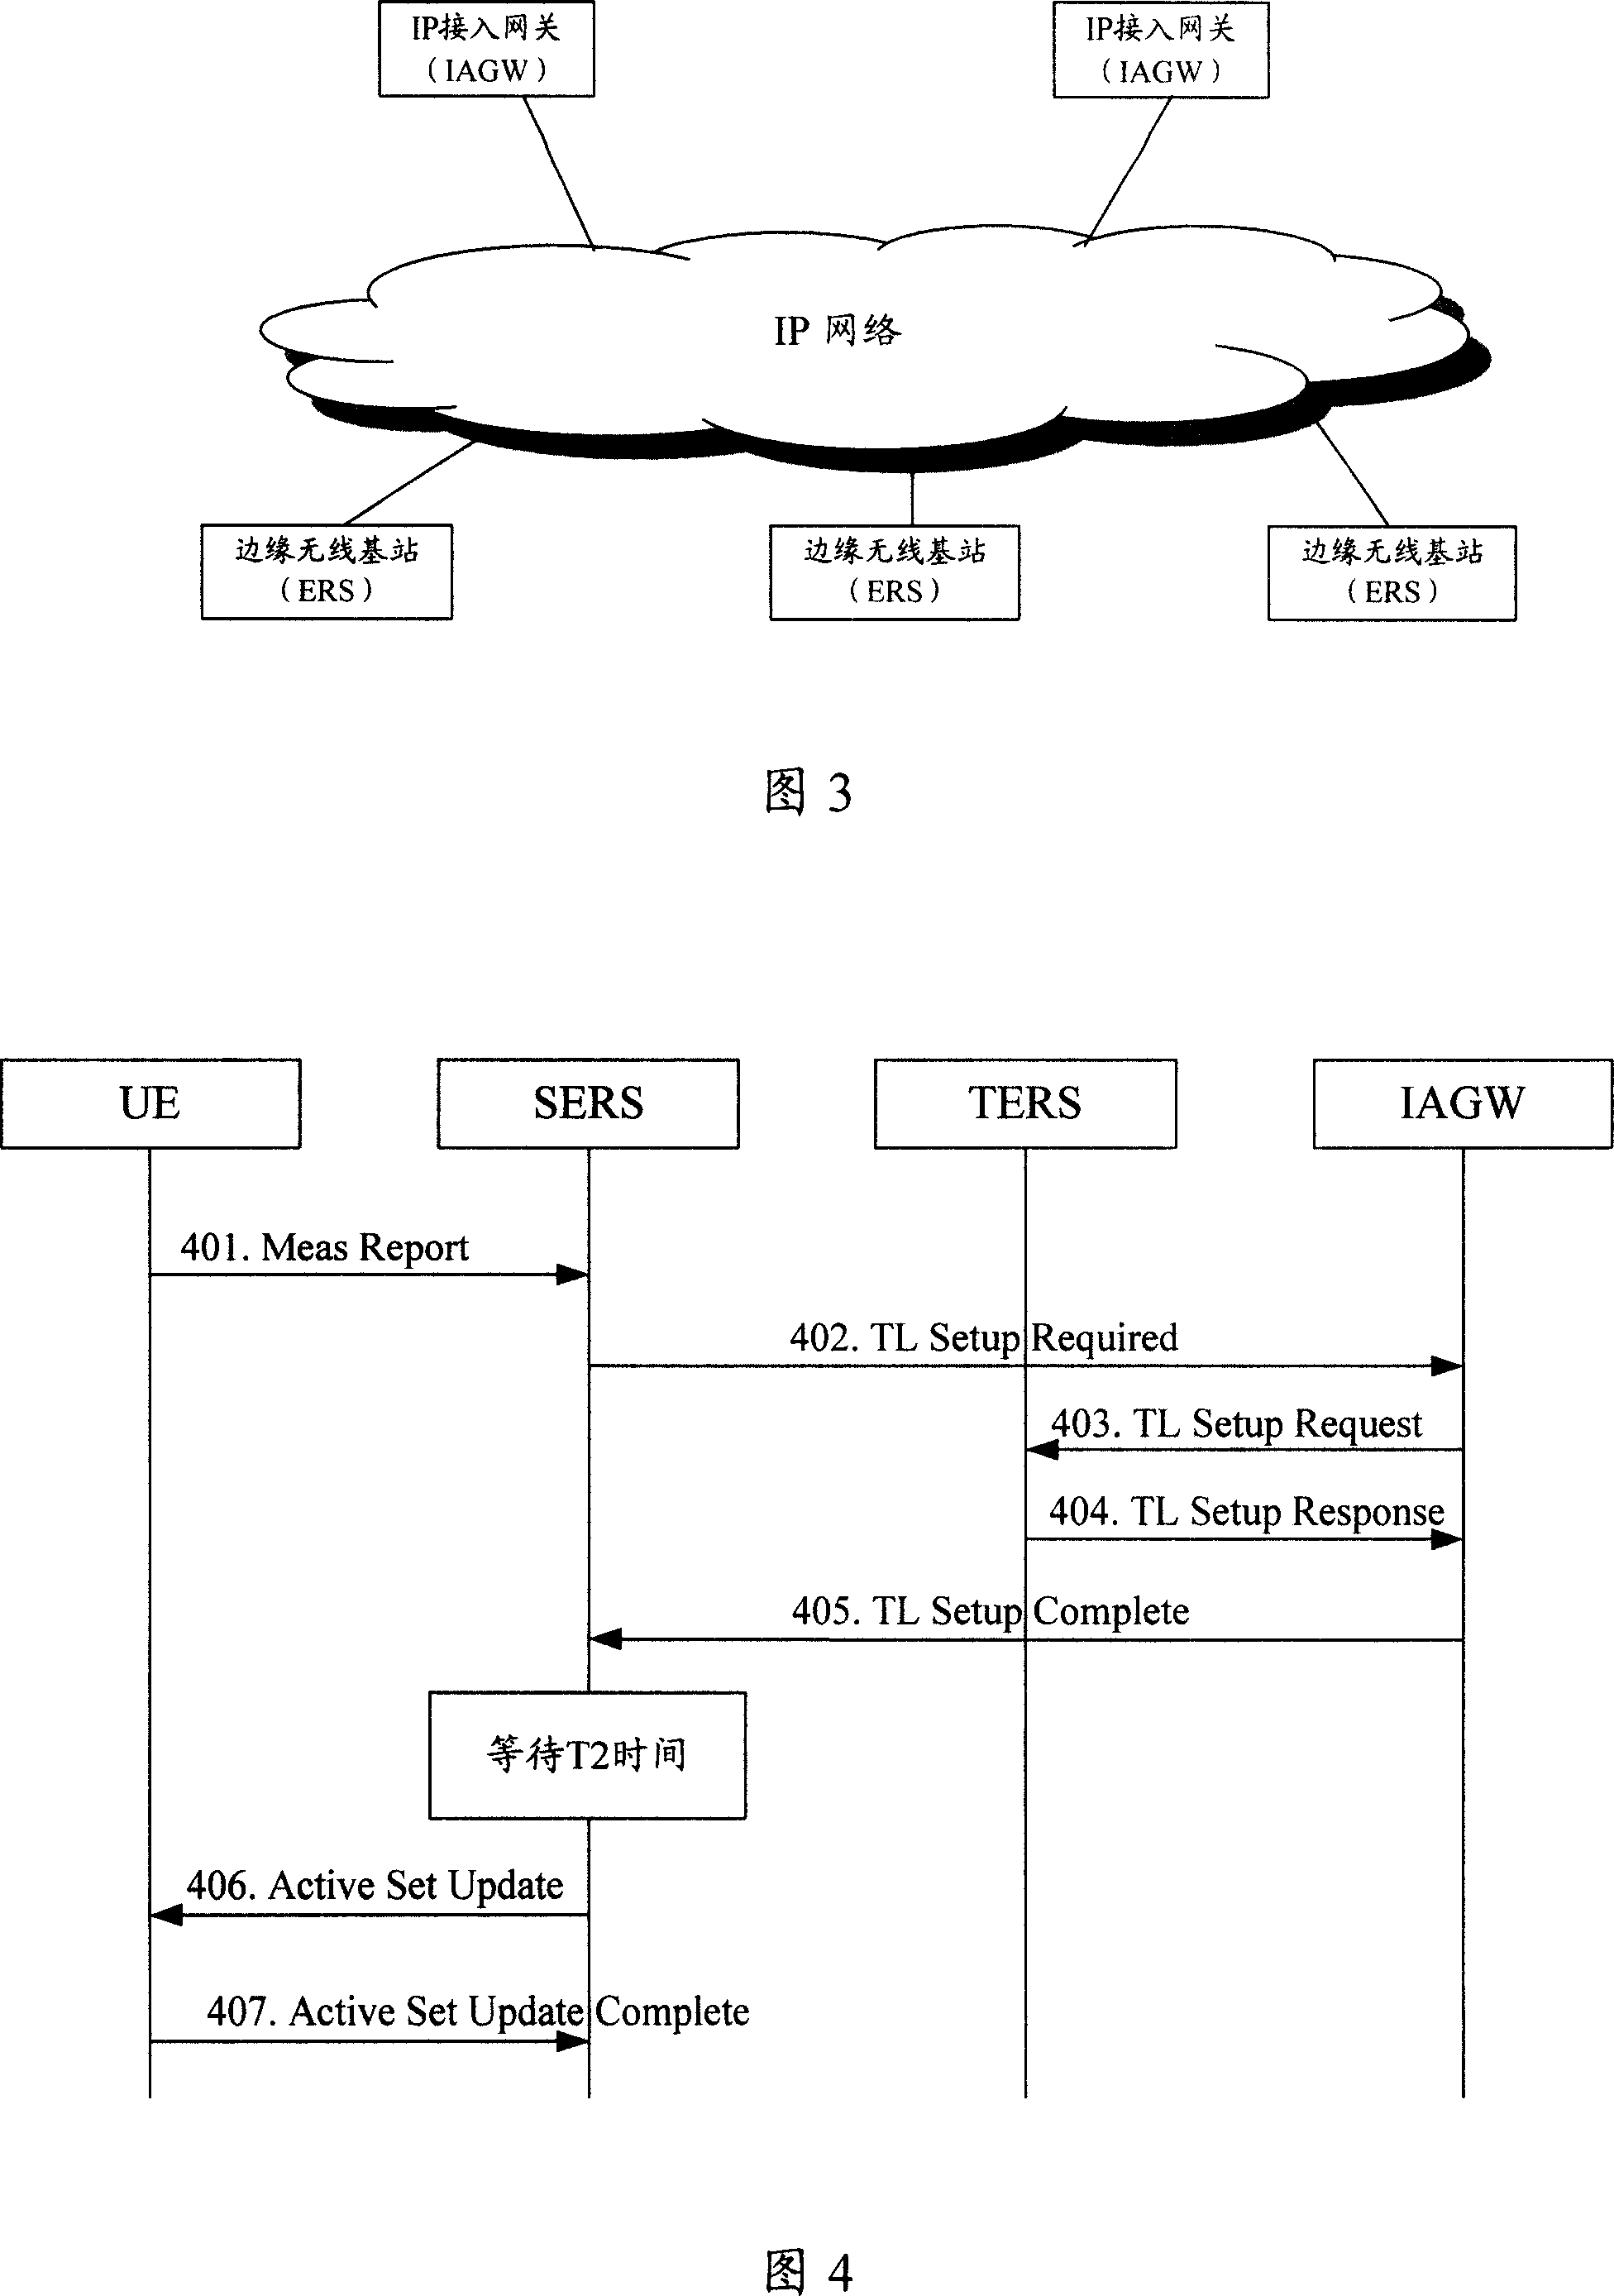 A method and device for multicast switching